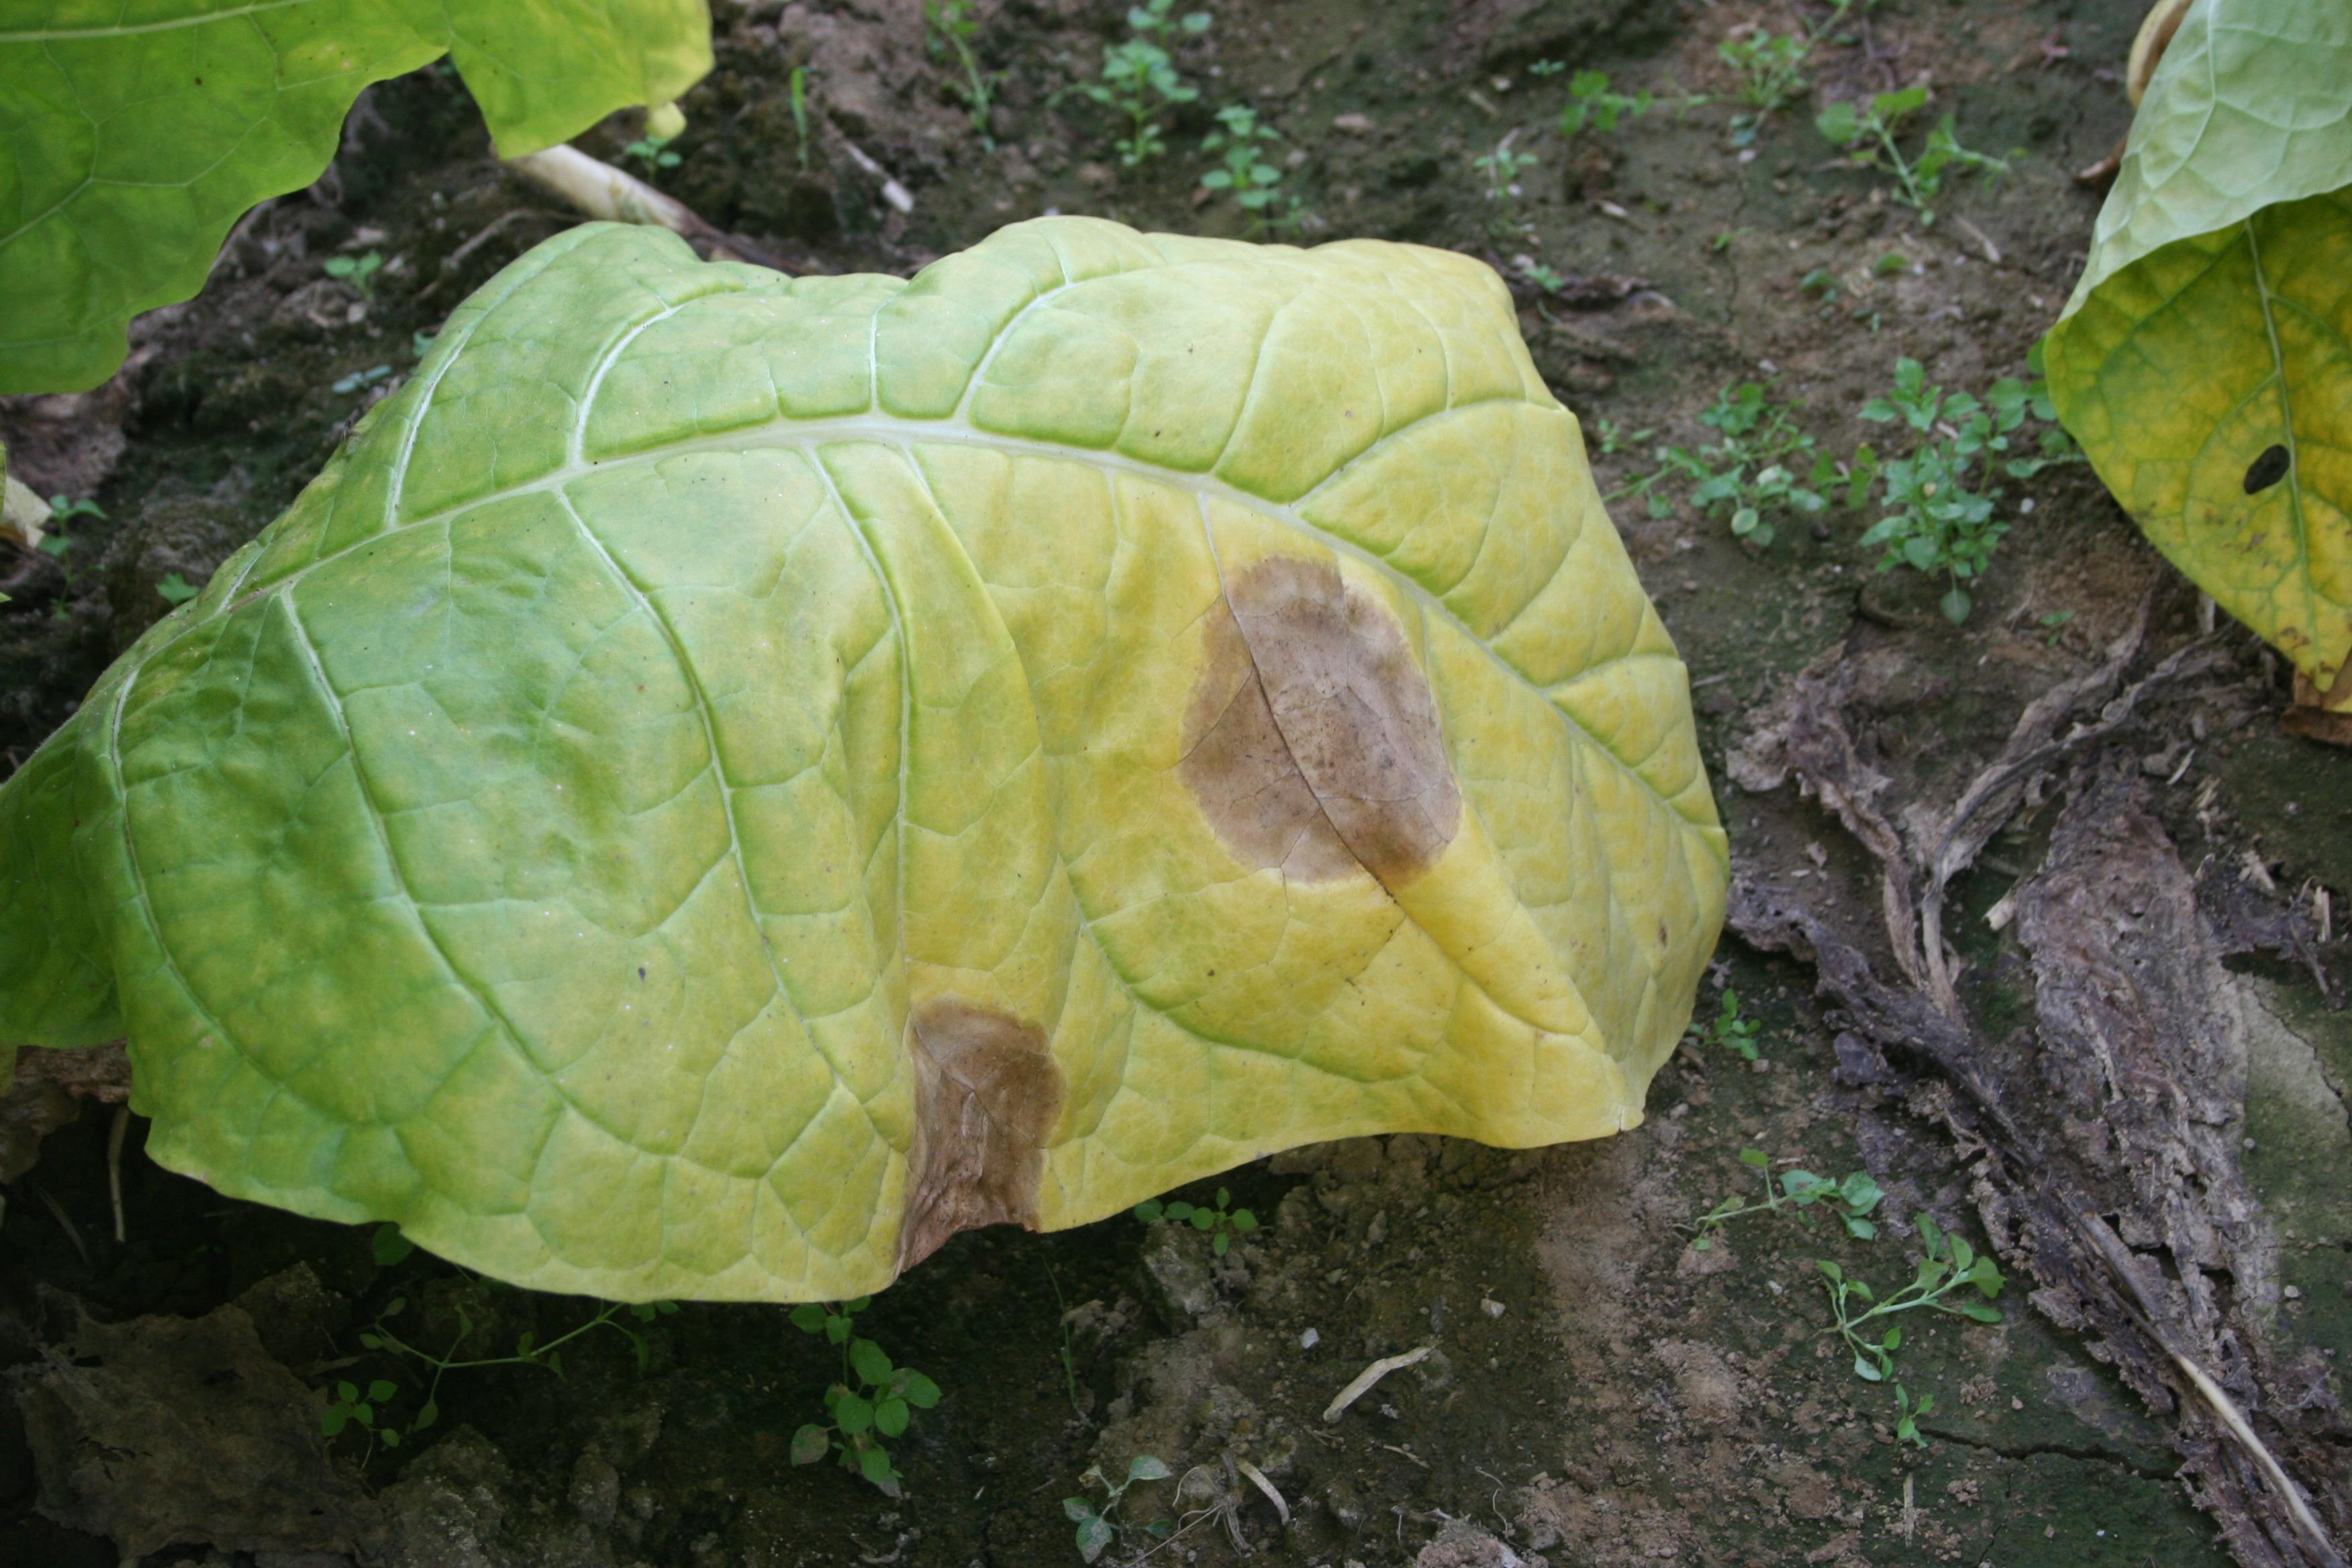 Leaves turn yellow as a result of infections from the black shank pathogen. (Photo: Kenneth Seebold, UK)